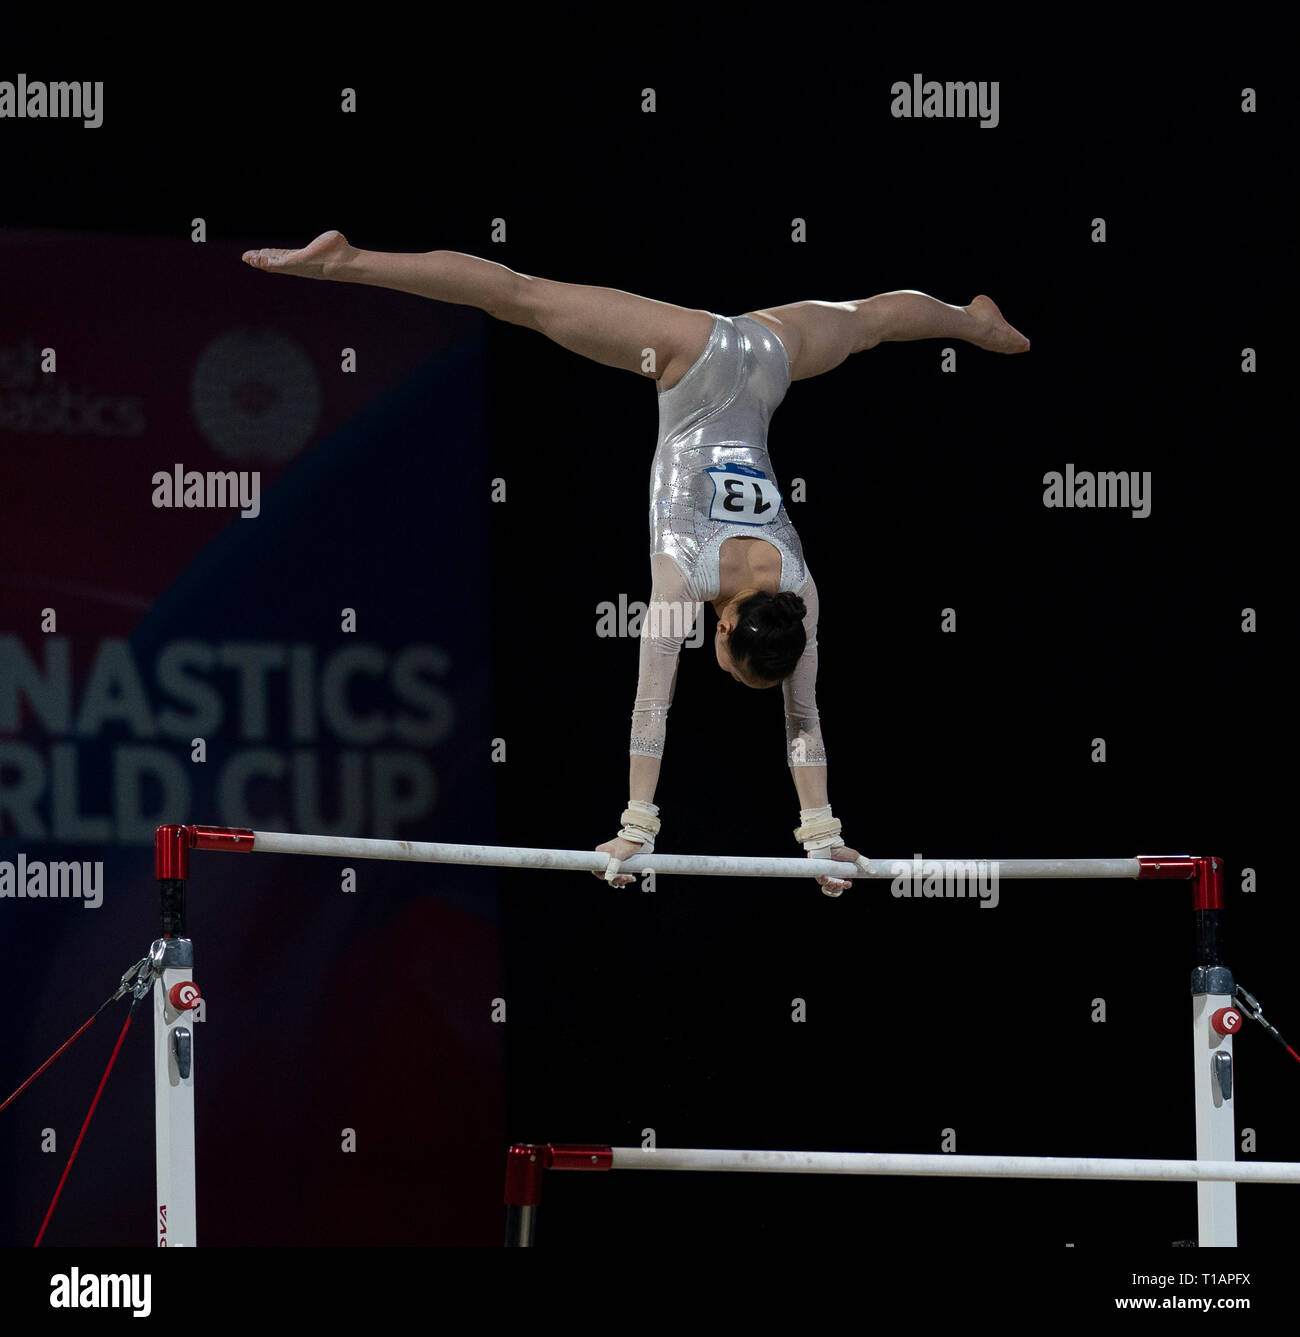 Jieyu Liu (China) seen in action during the Gymnastics World Cup 2019 at Genting Arena in Birmingham. Stock Photo